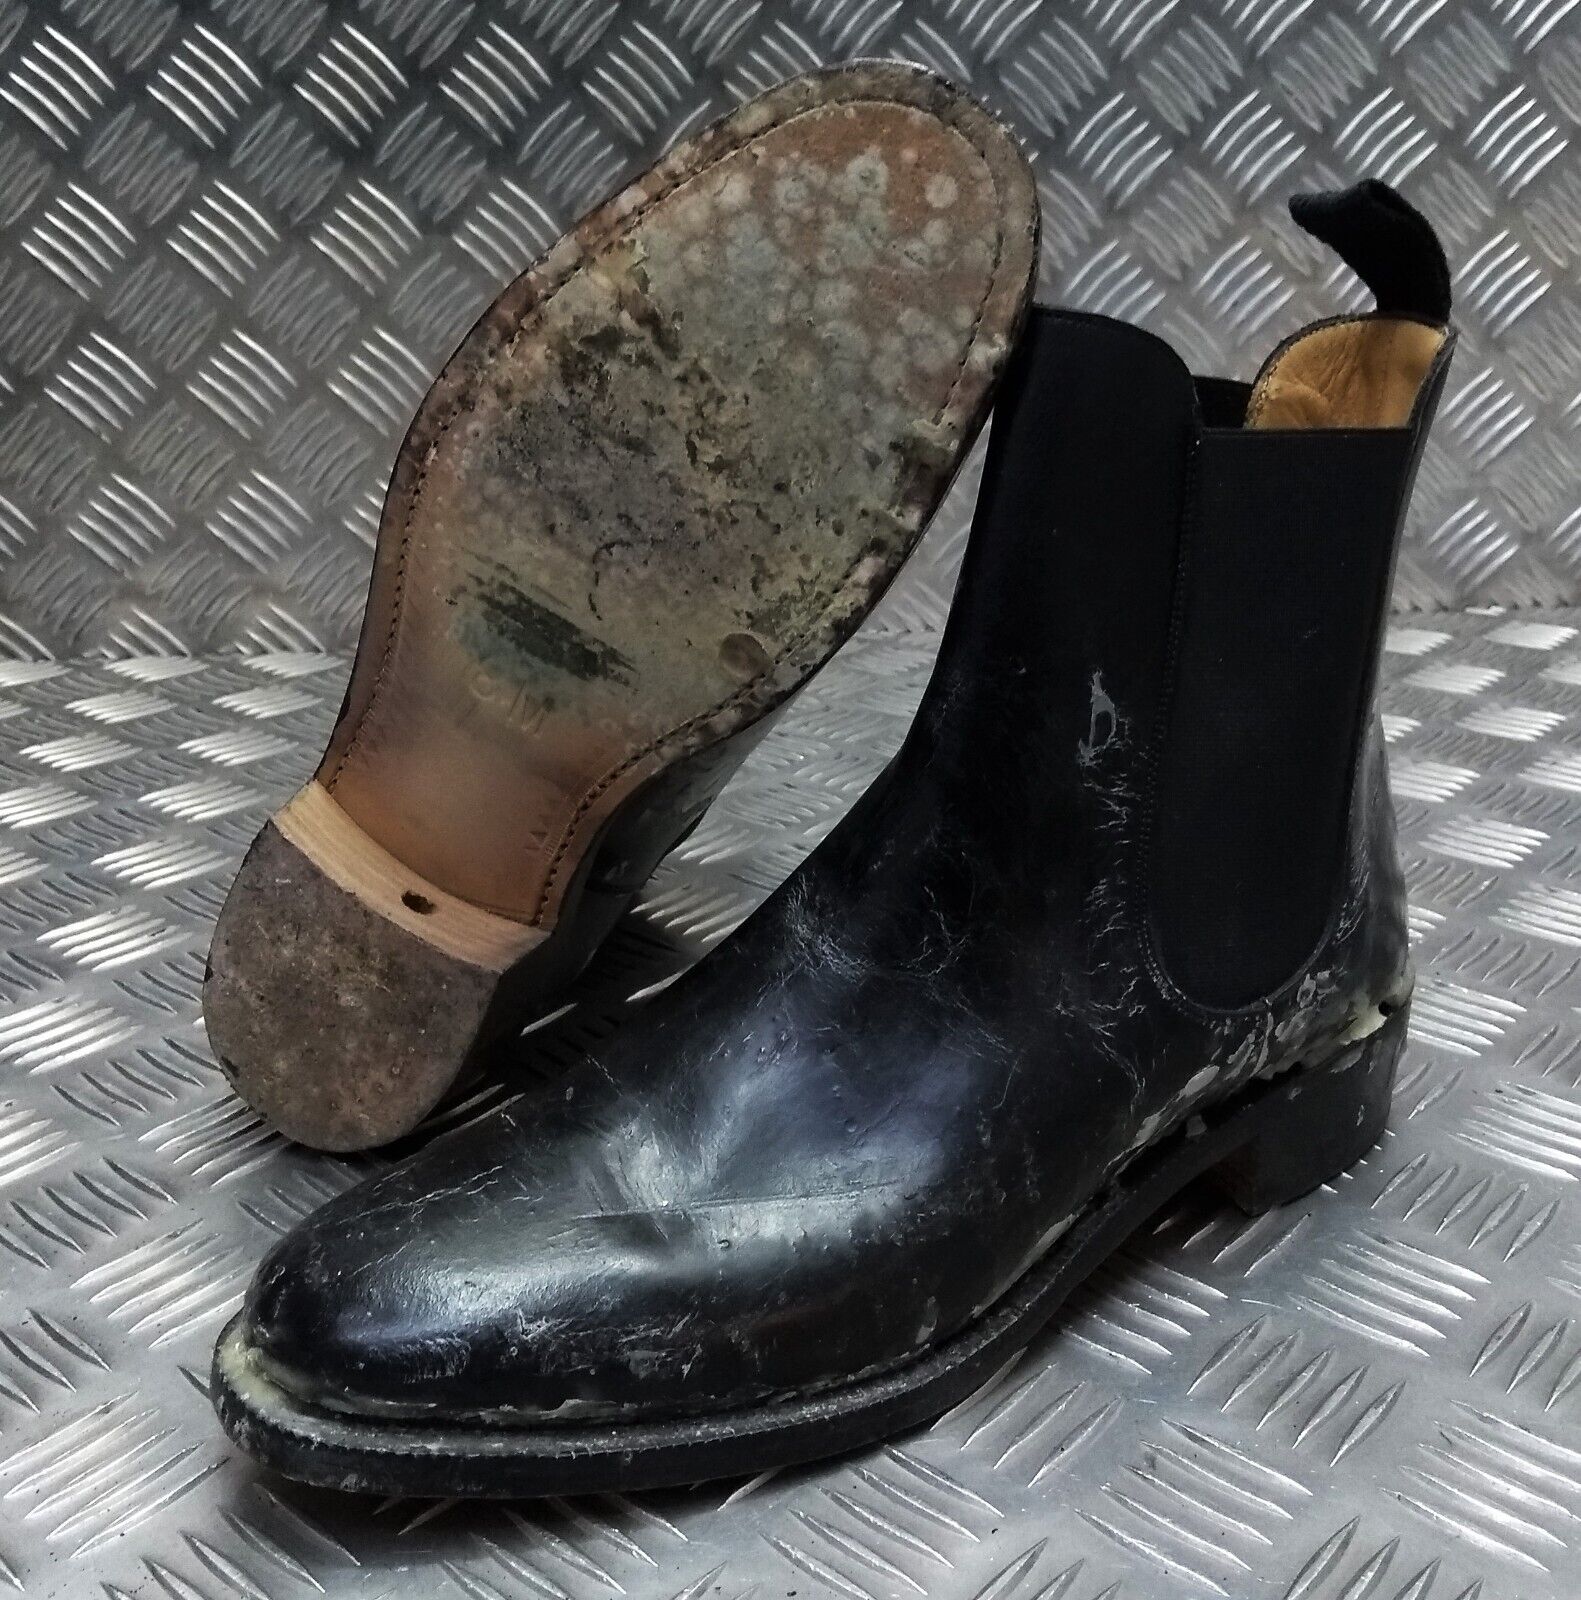 Chelsea Parade Boots Genuine British Military Officers Issue With Spur Housing